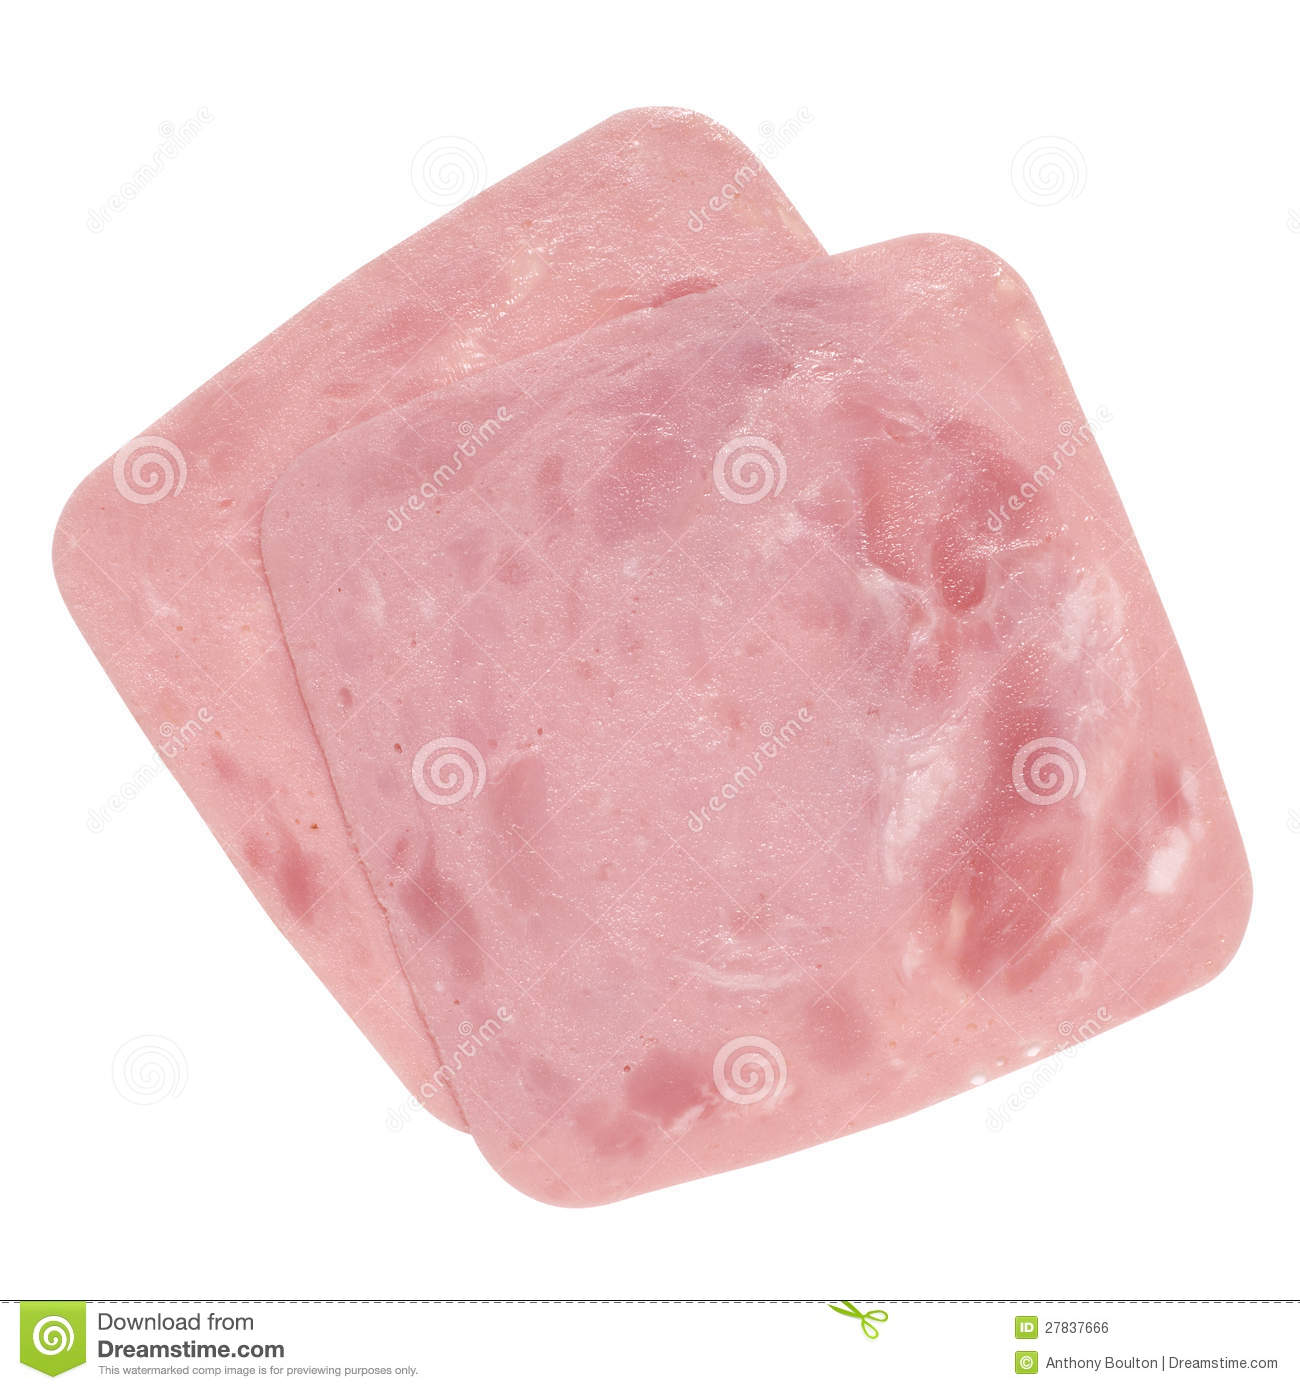 Cooked Ham Slices Royalty Free Stock Image   Image  27837666